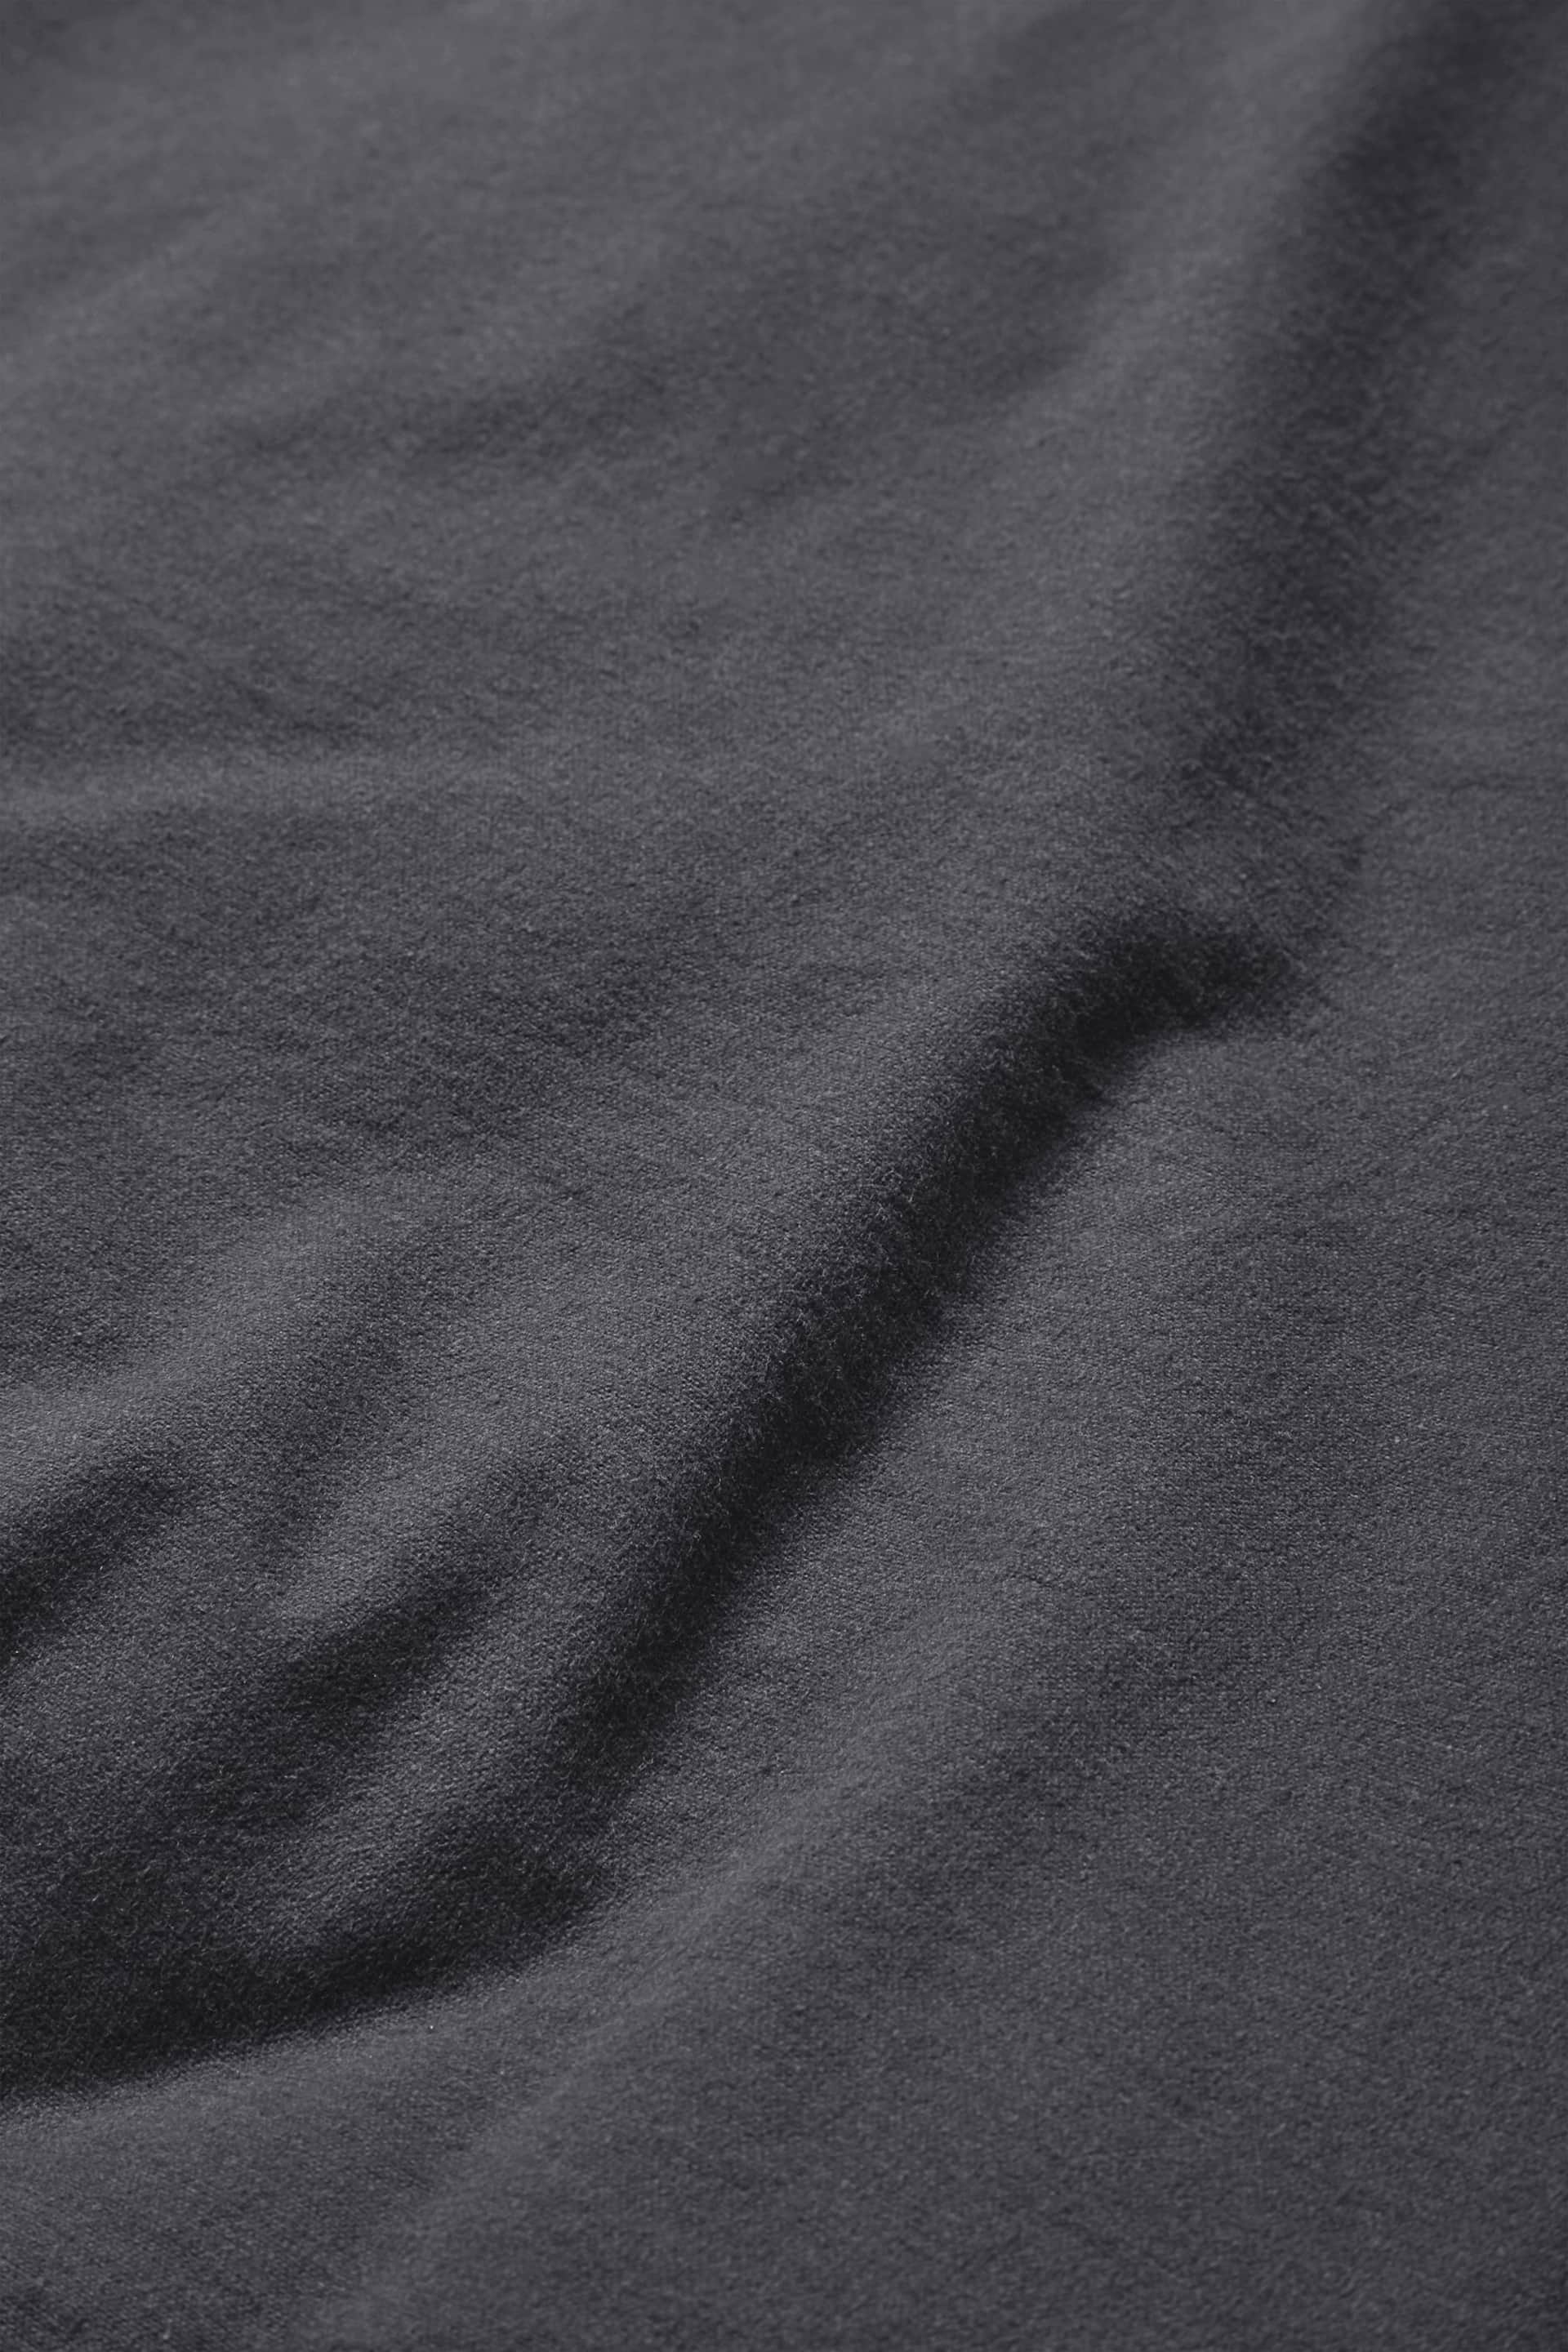 Charcoal Grey 100% Cotton Supersoft Brushed Plain Duvet Cover And Pillowcase Set - Image 5 of 6